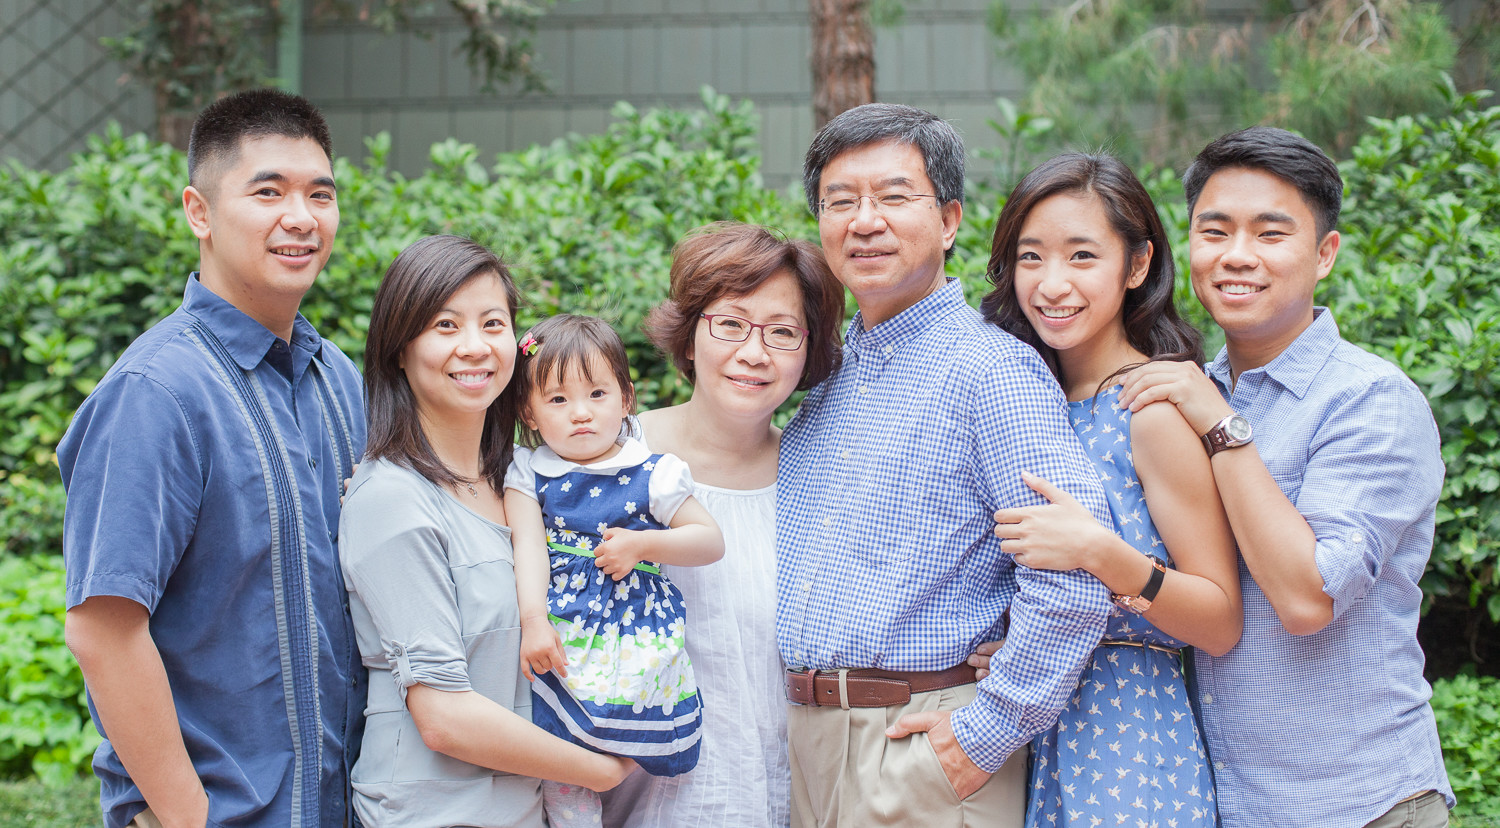 The Lee Family Portraits | Downtown Disney in Anaheim, CA